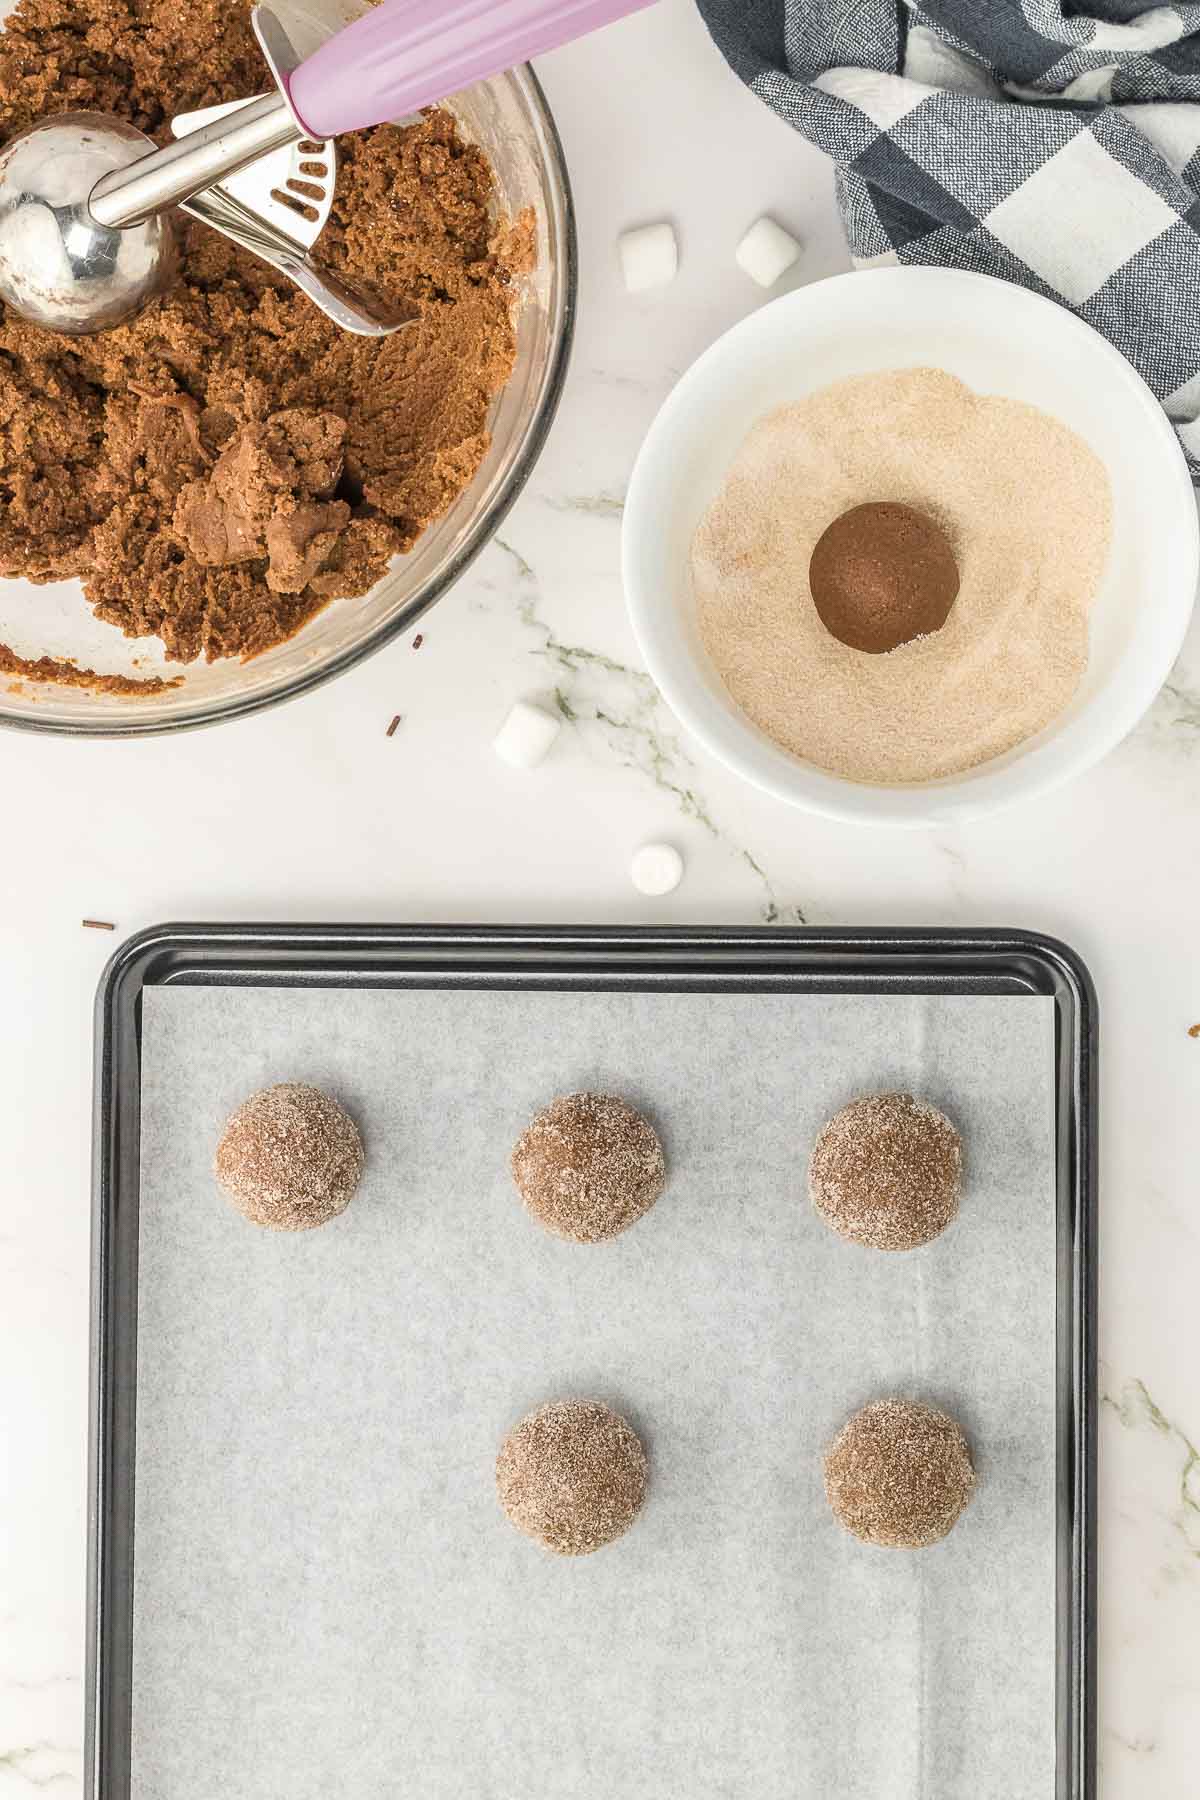 Dough rolled into 1 inch balls placed on a baking sheet.